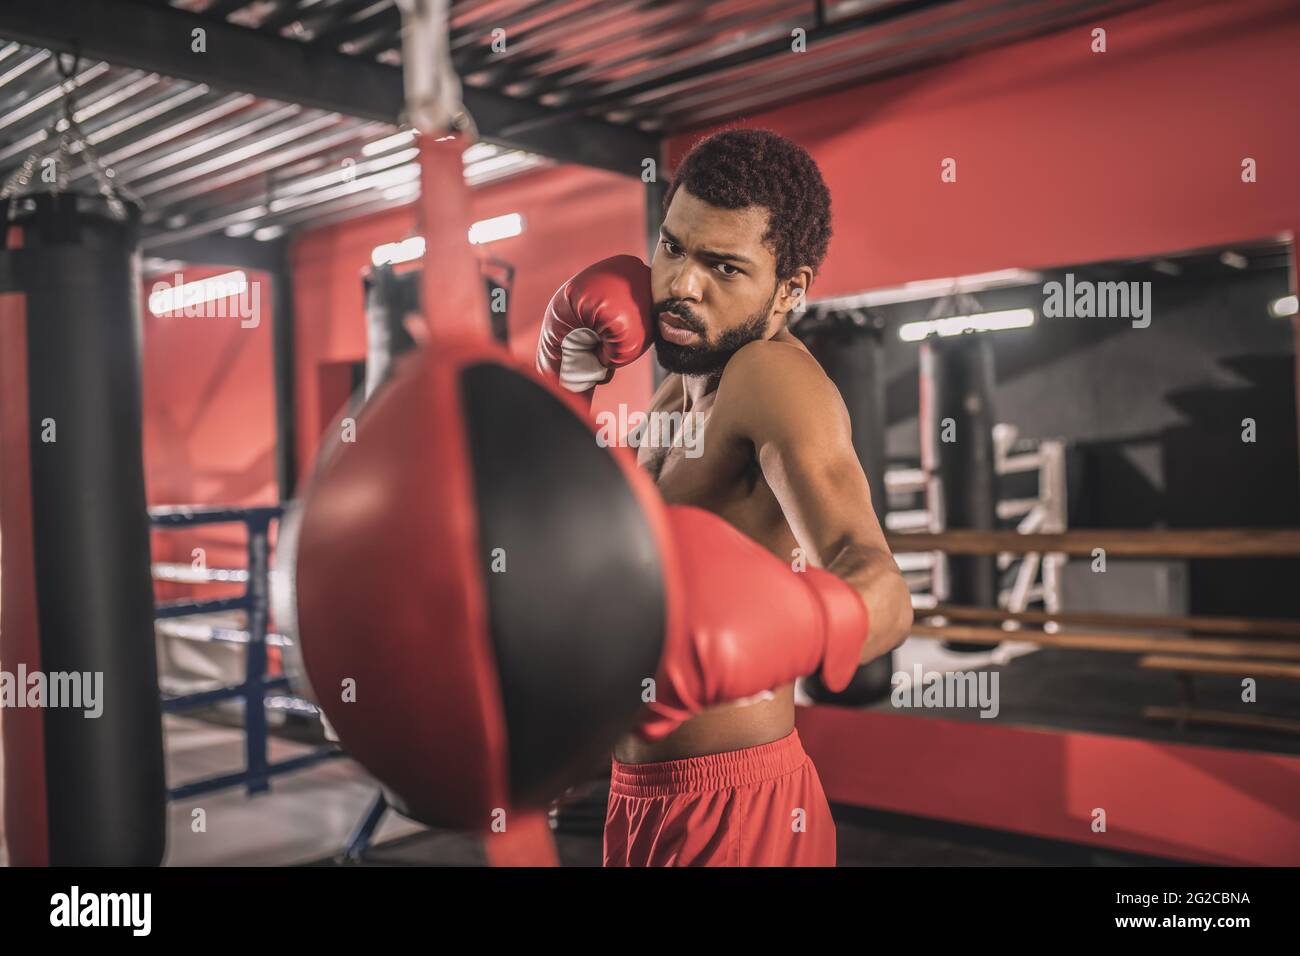 African american kickboxer having a workout in a gym and looking concentrated Stock Photo